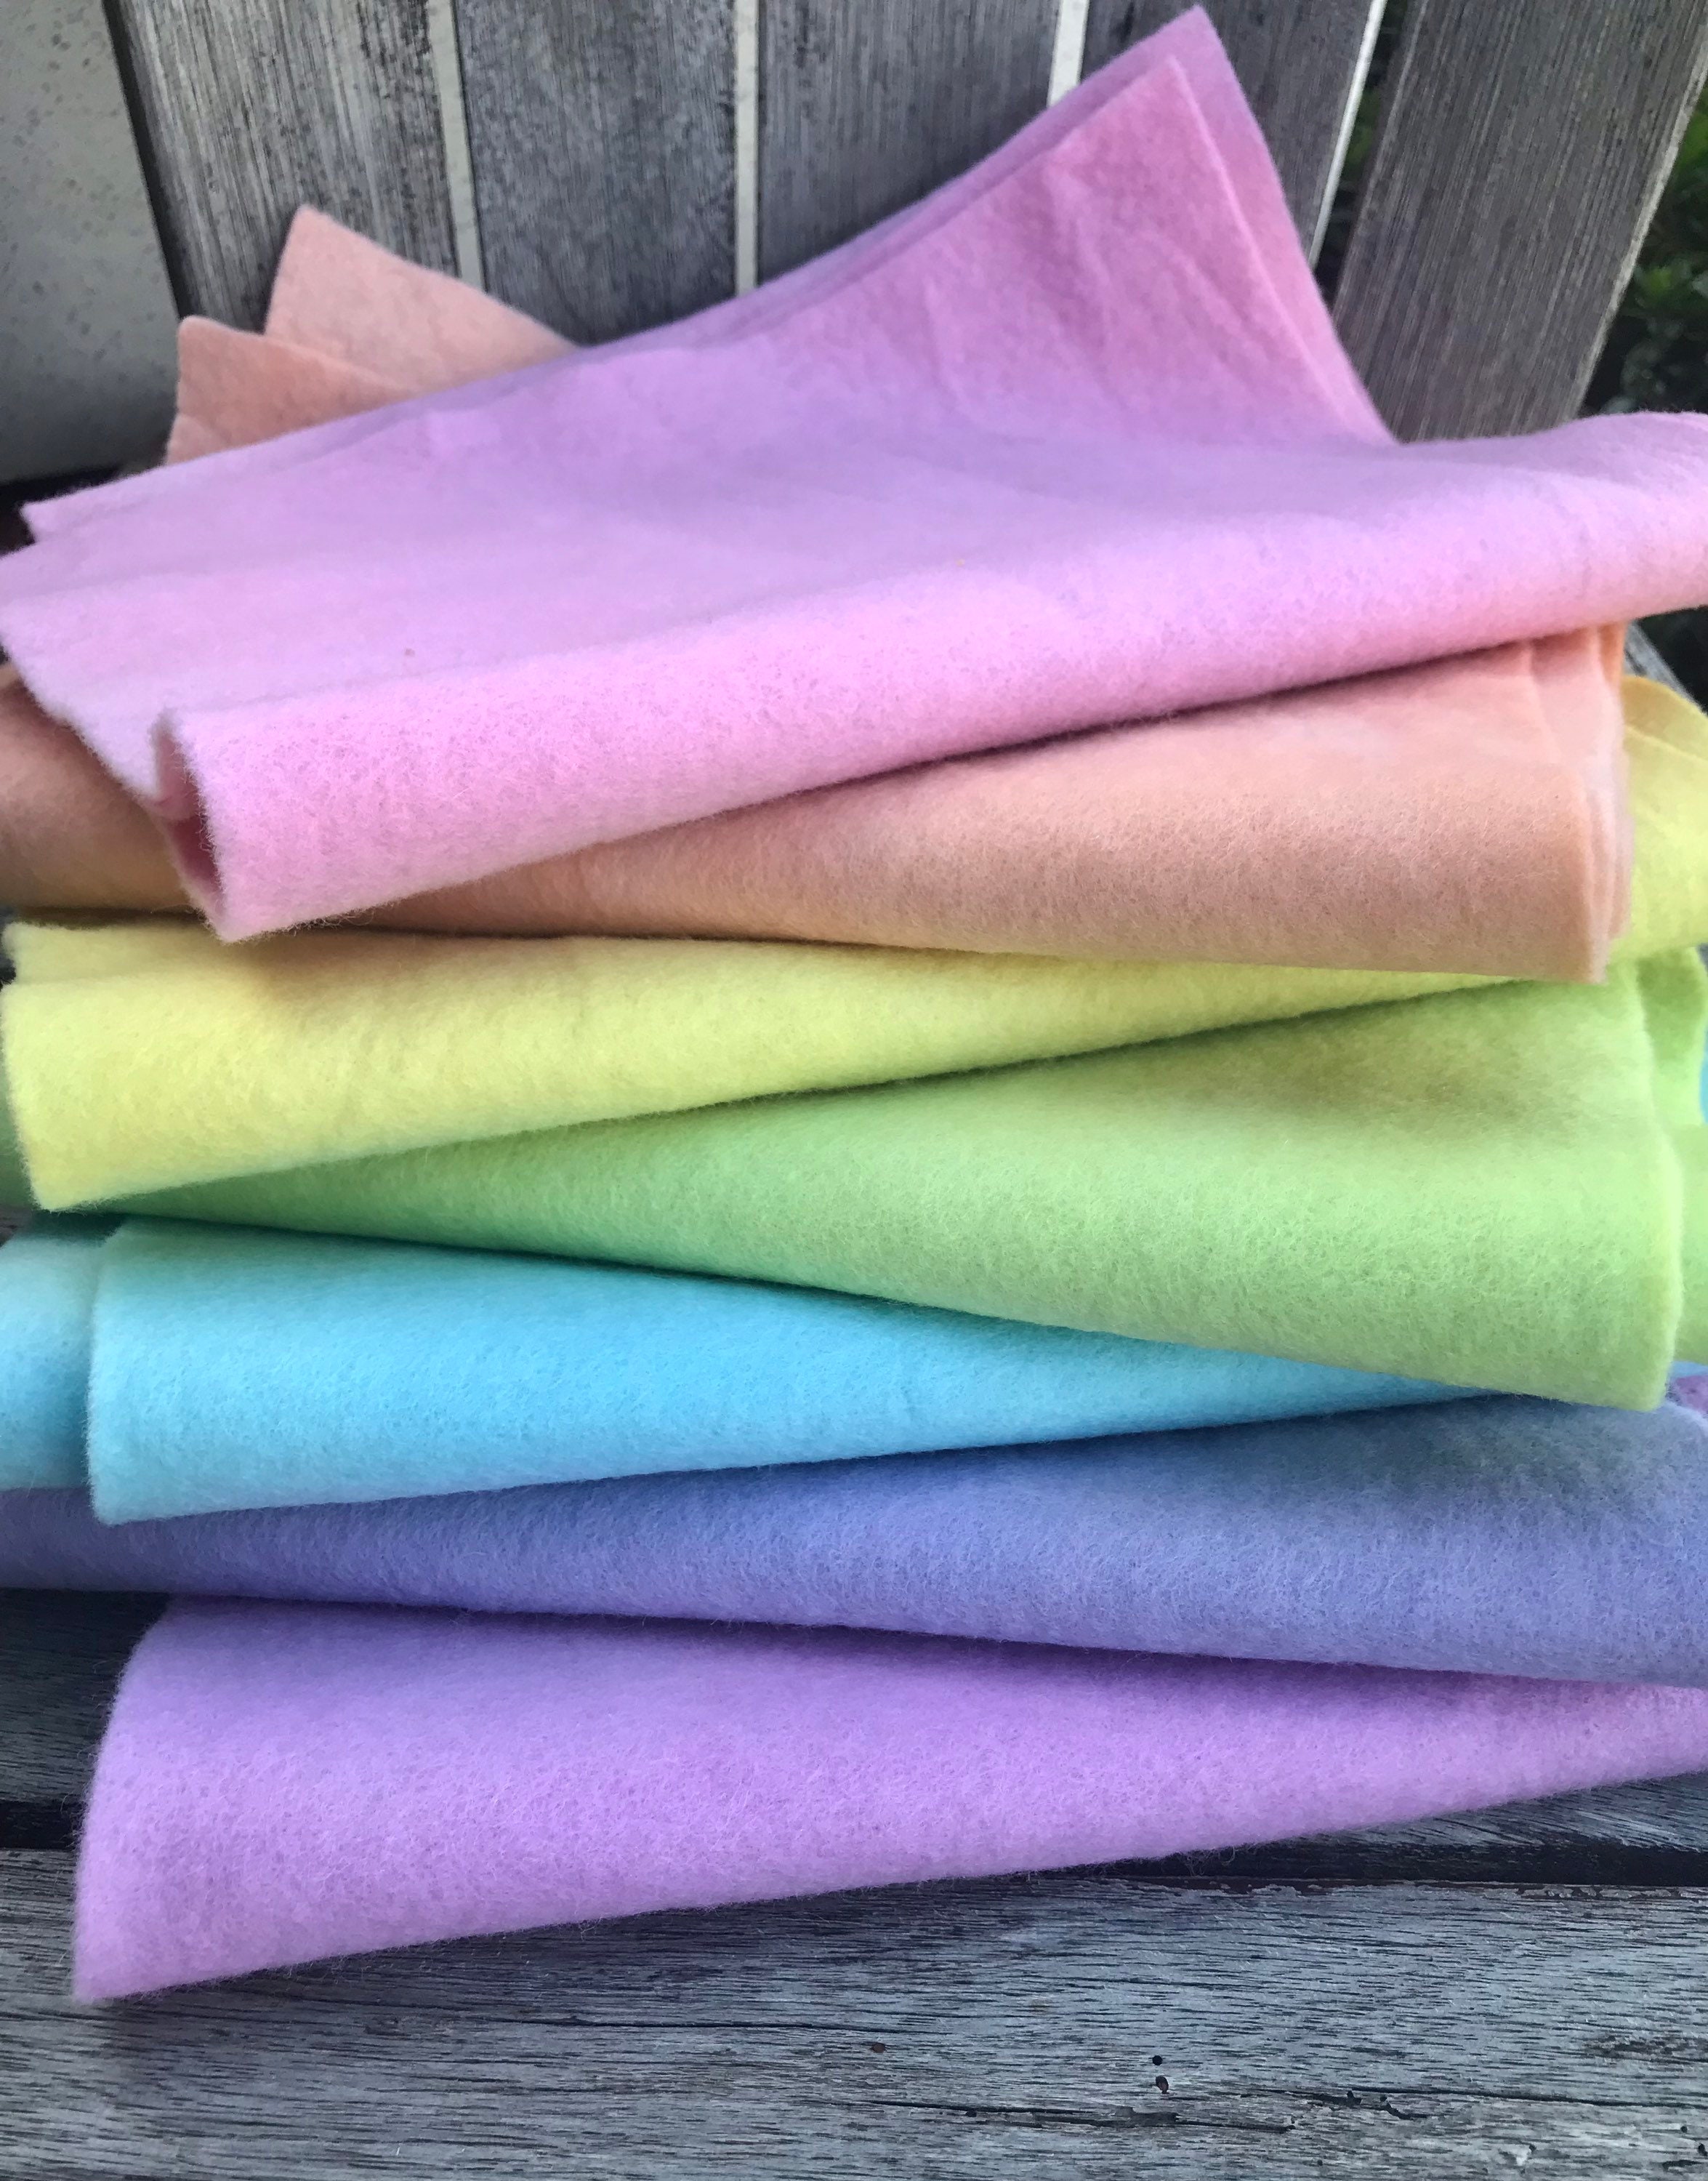 50 Pack Felt Fabric Sheets for Crafts, Sewing, Party Decorations, 8x8  20x20cm, 25 Rainbow Colors 